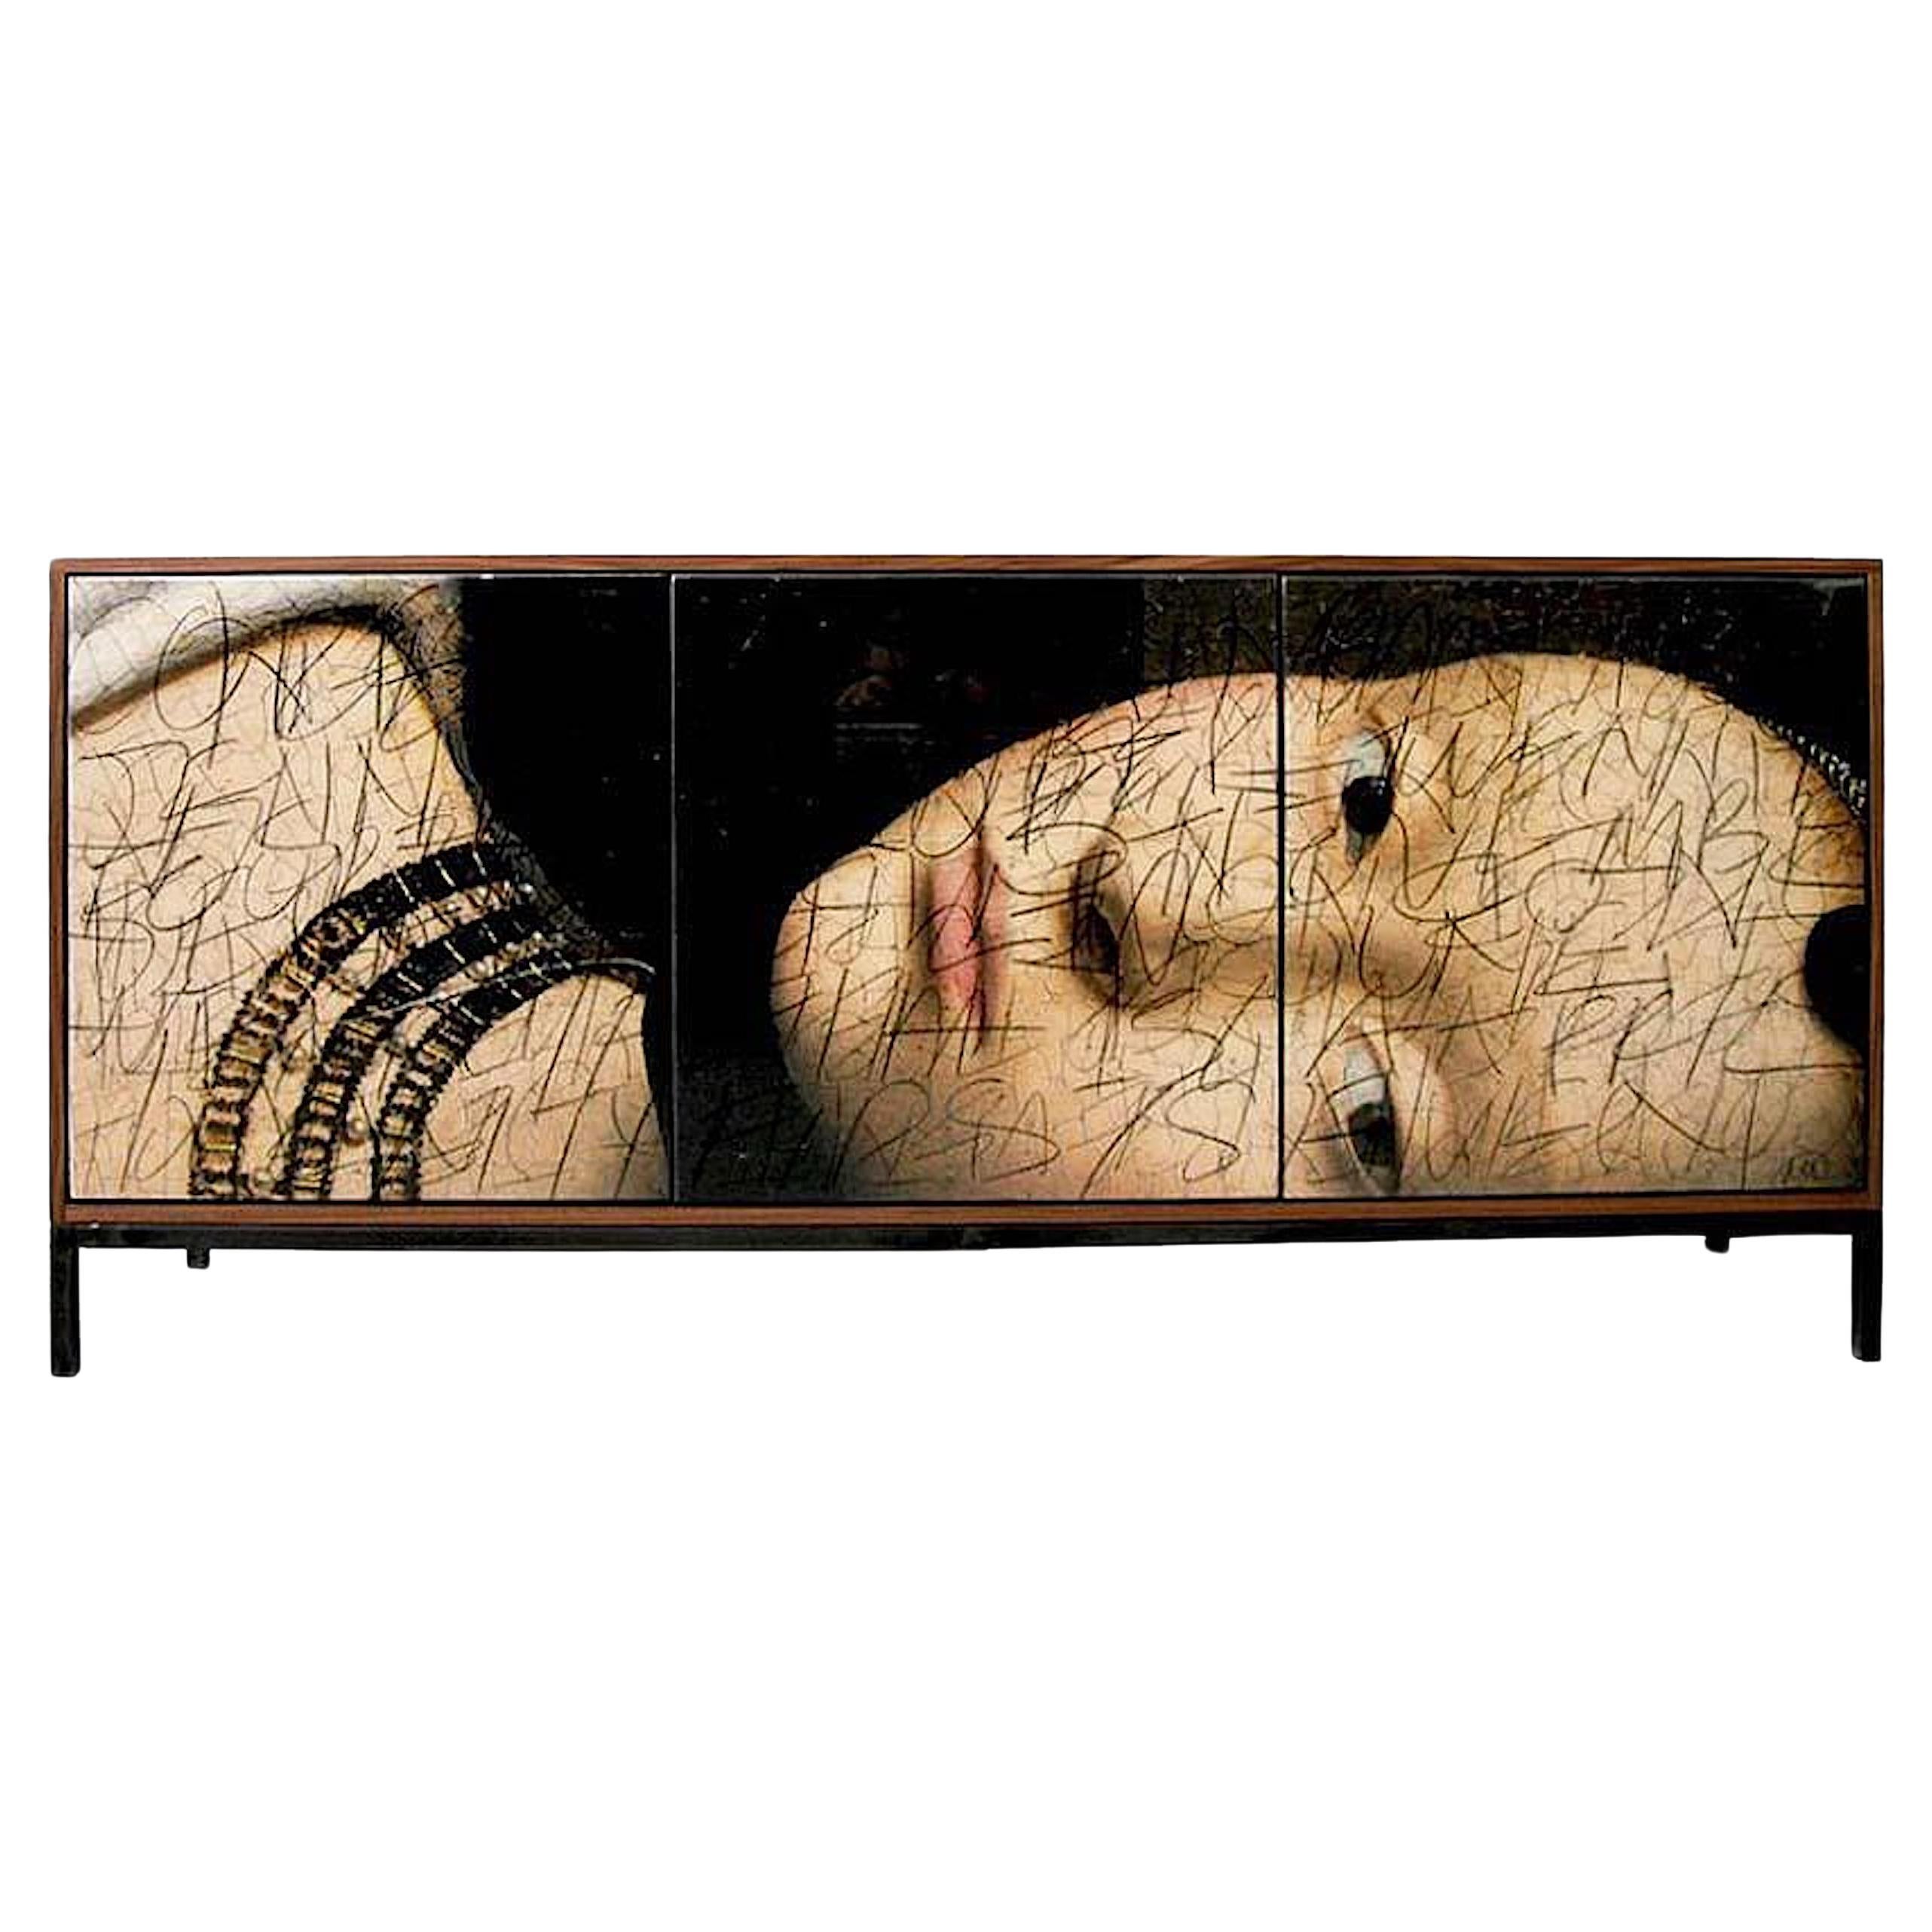 Side Eye Cabinet by Morgan Clayhall, mix media artwork on doors For Sale